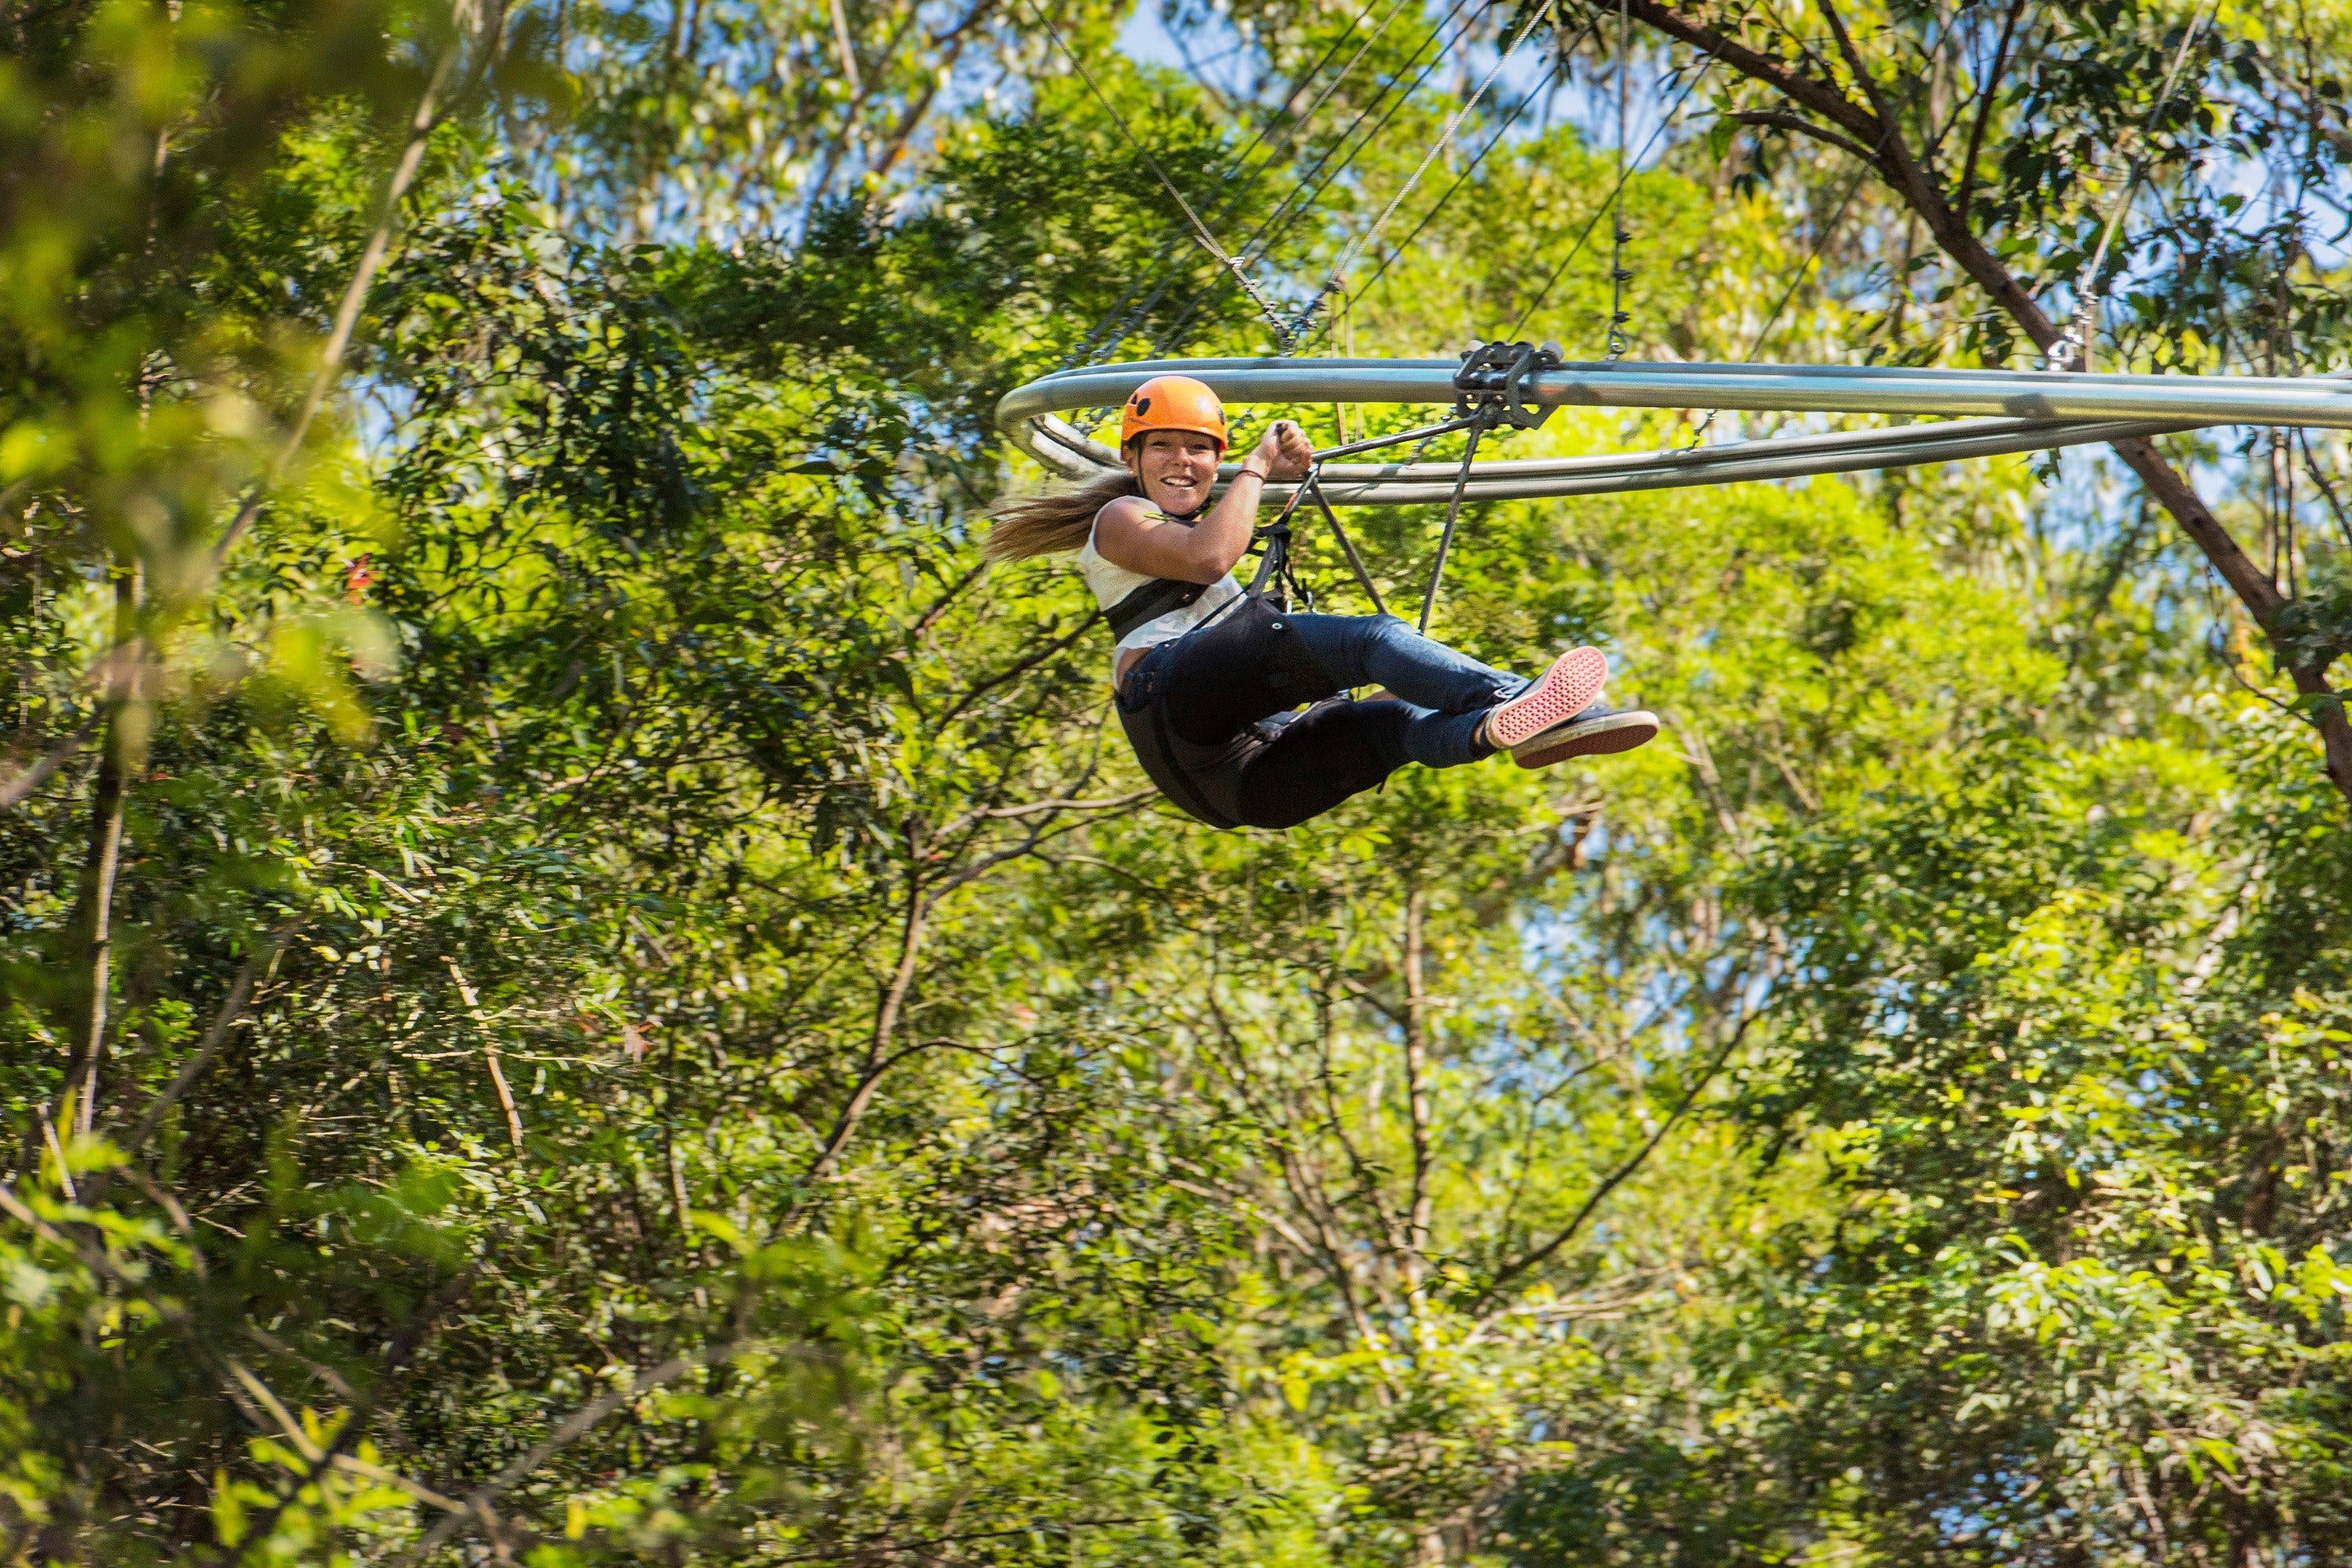 TreeTop Crazy Rider - Find Attractions